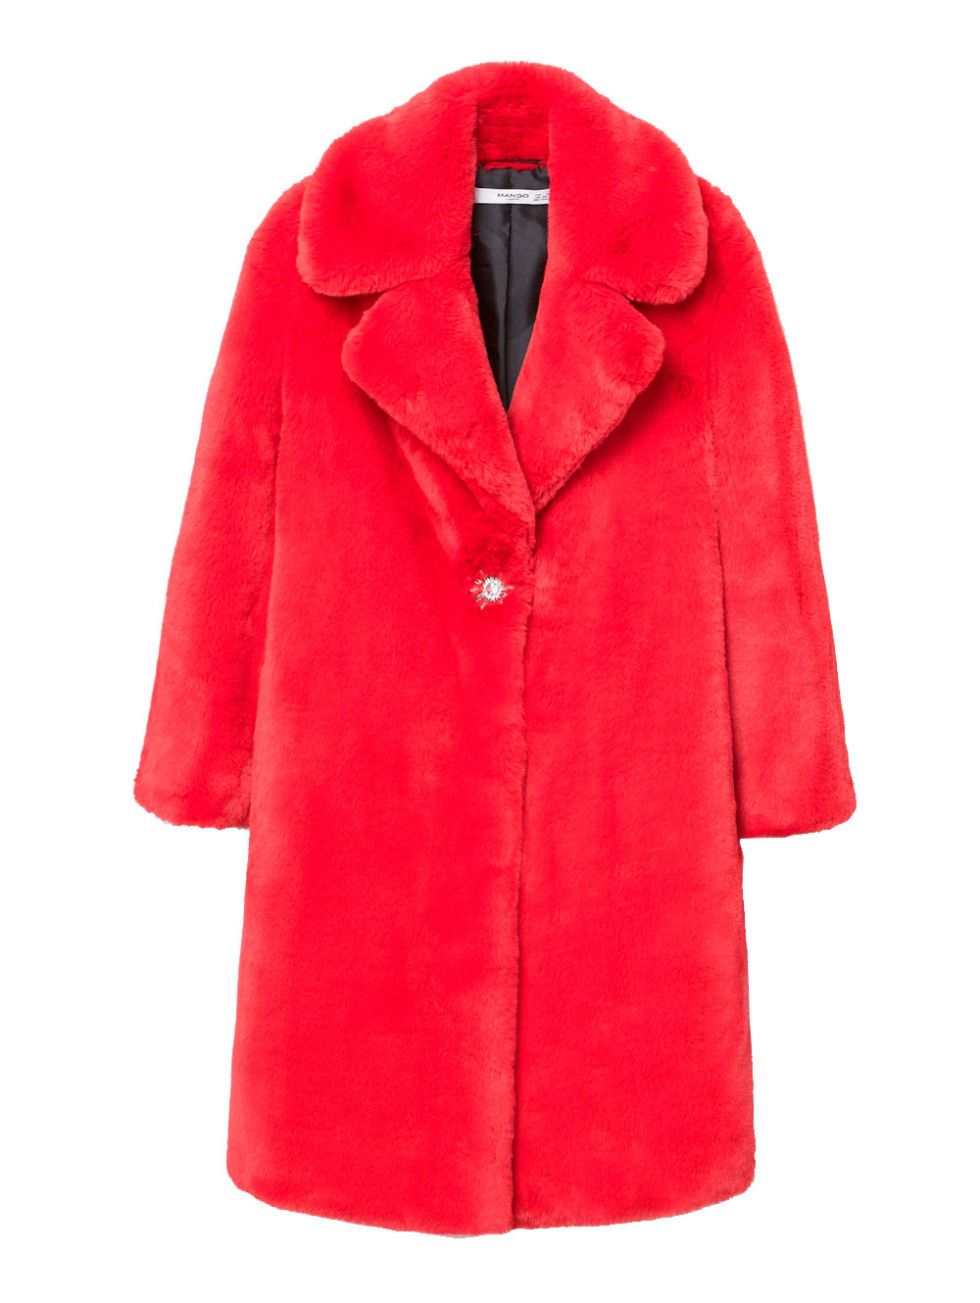 Clothing, Outerwear, Coat, Red, Fur, Sleeve, Fur clothing, Overcoat, Collar, Textile, 